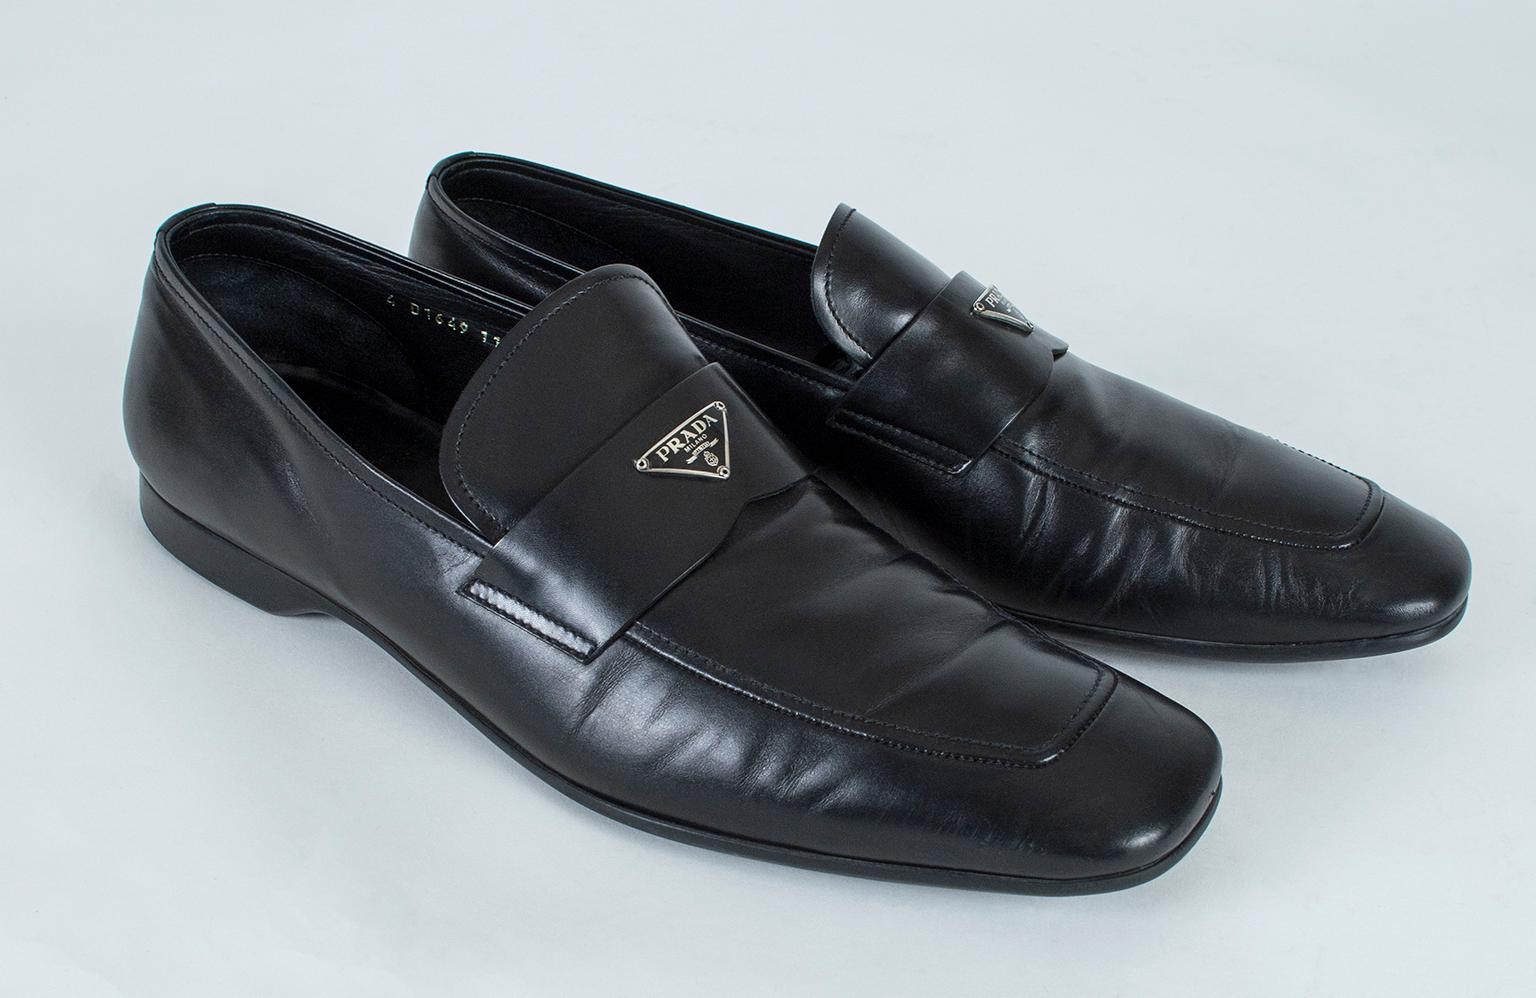 As soft and comfortable as a pair of sneakers (but infinitely more elegant), these rubber soled loafers combine the cushion of running shoes with the polish of dress shoes. Their lean, ever-so-slightly pointed toes impart sophistication, while the